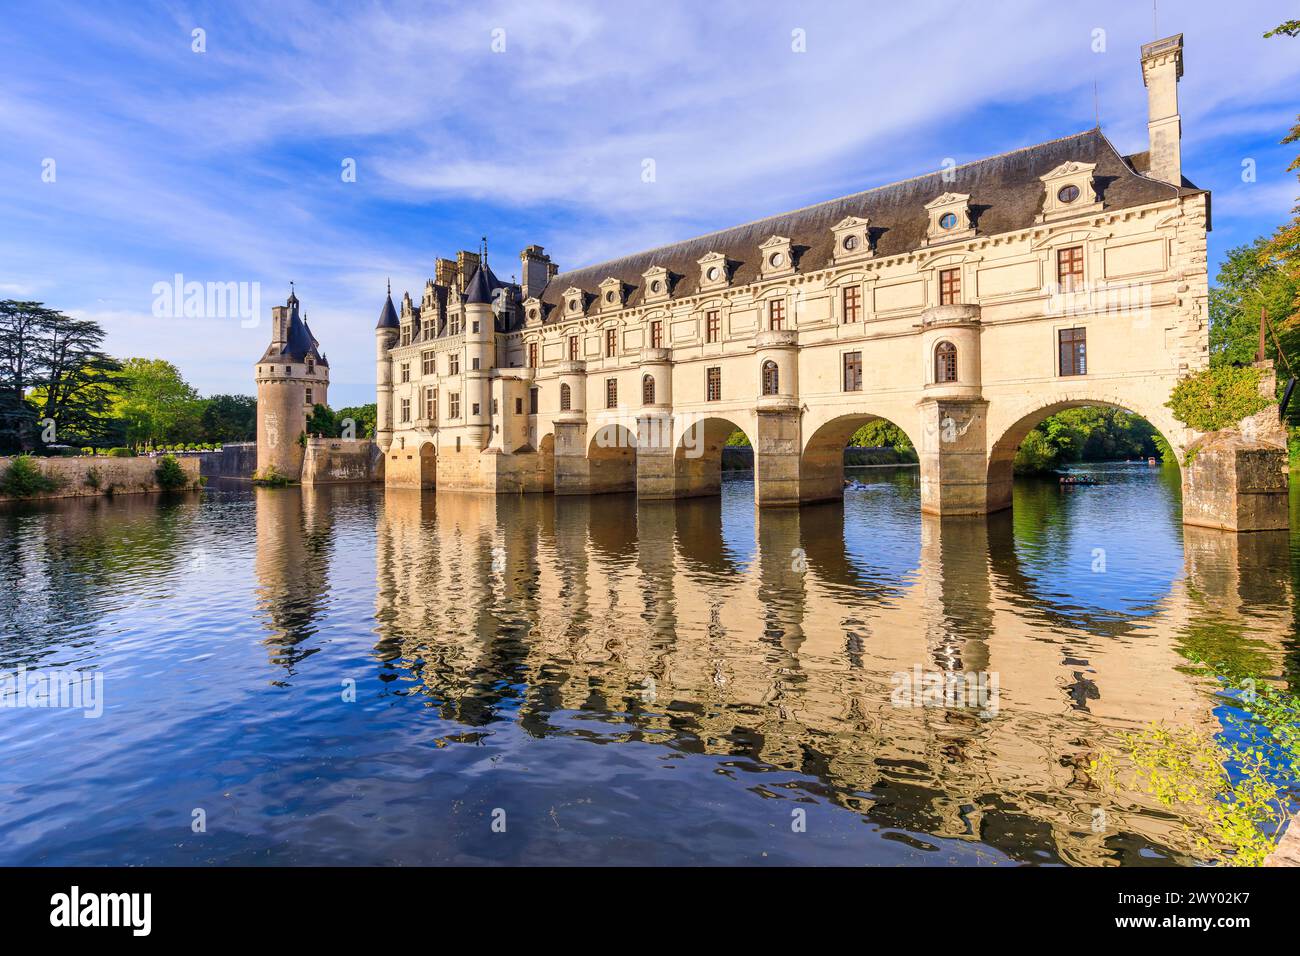 Chateau (castle) of Chenonceau. Loire Valley, France. Stock Photo